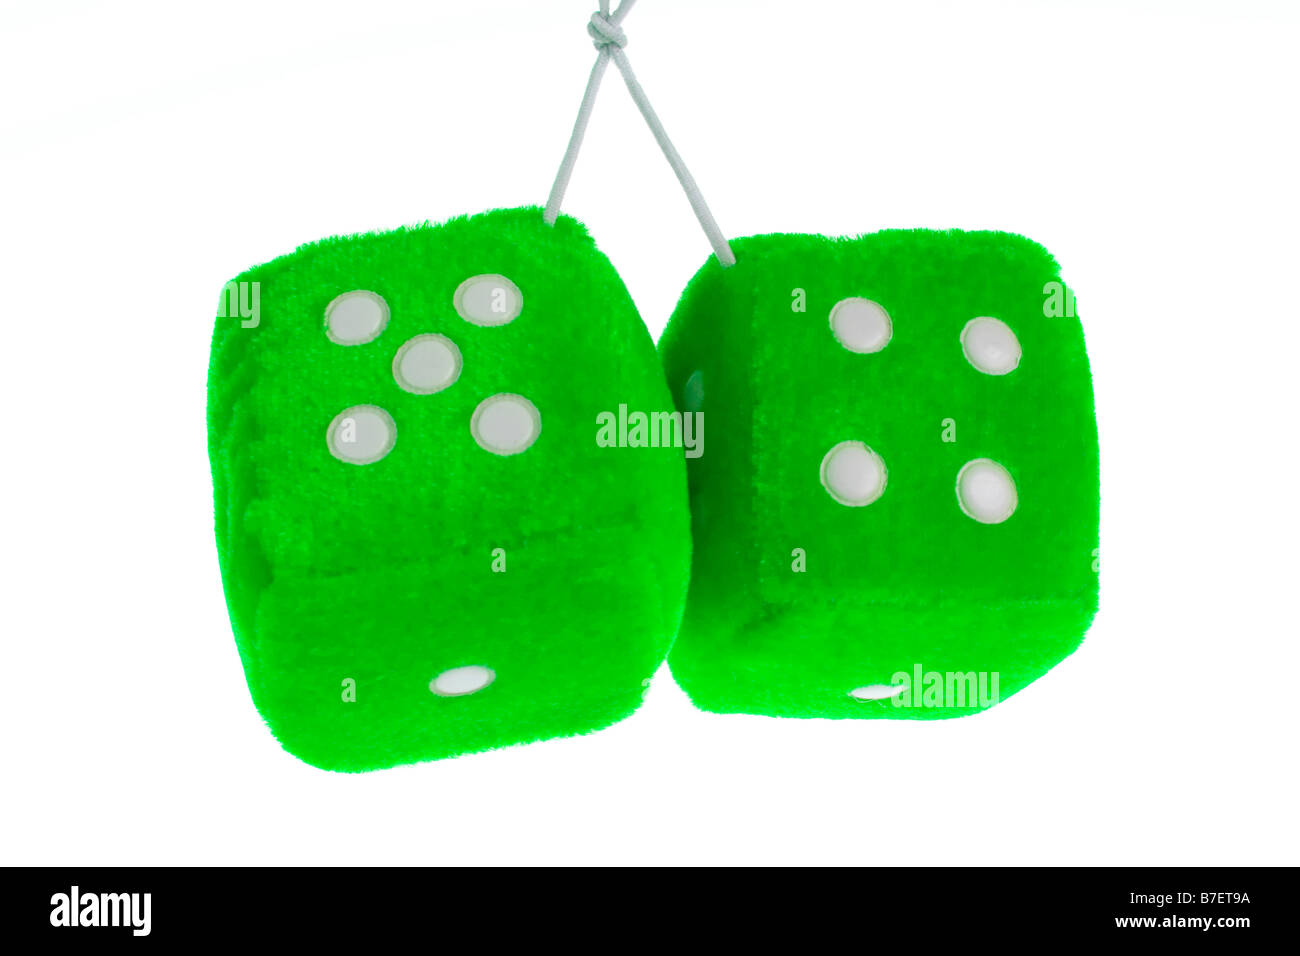 Pair of hanging furry dice on a pure white background. Stock Photo